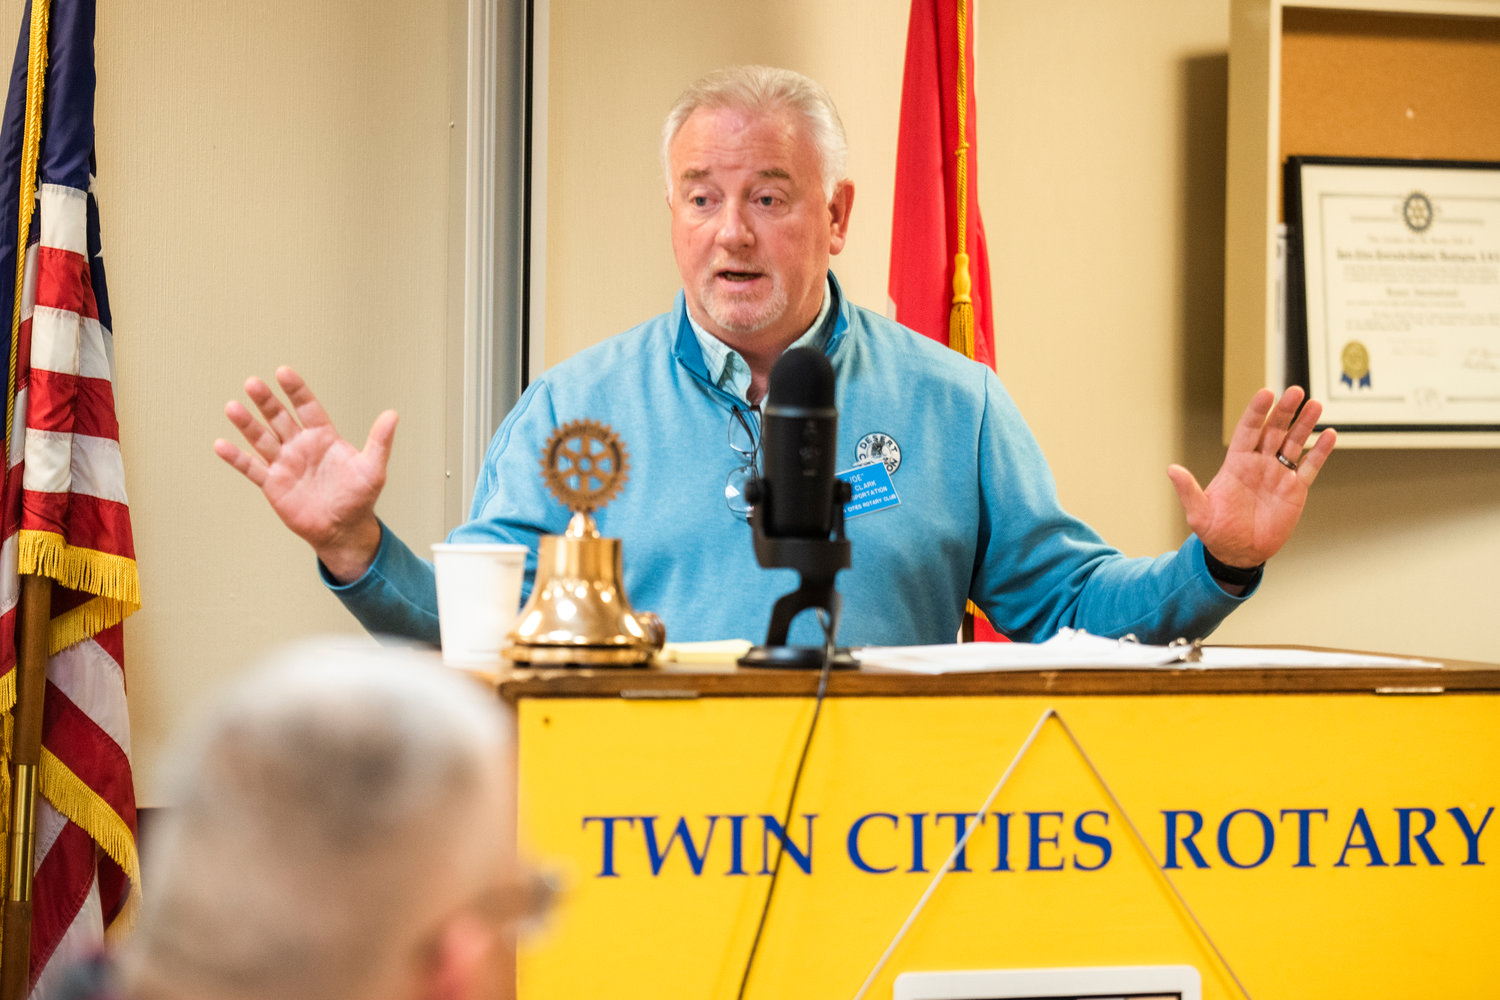 Twin Cities Rotary Club President Joe Clark speaks at a club meeting in Chehalis in early March.